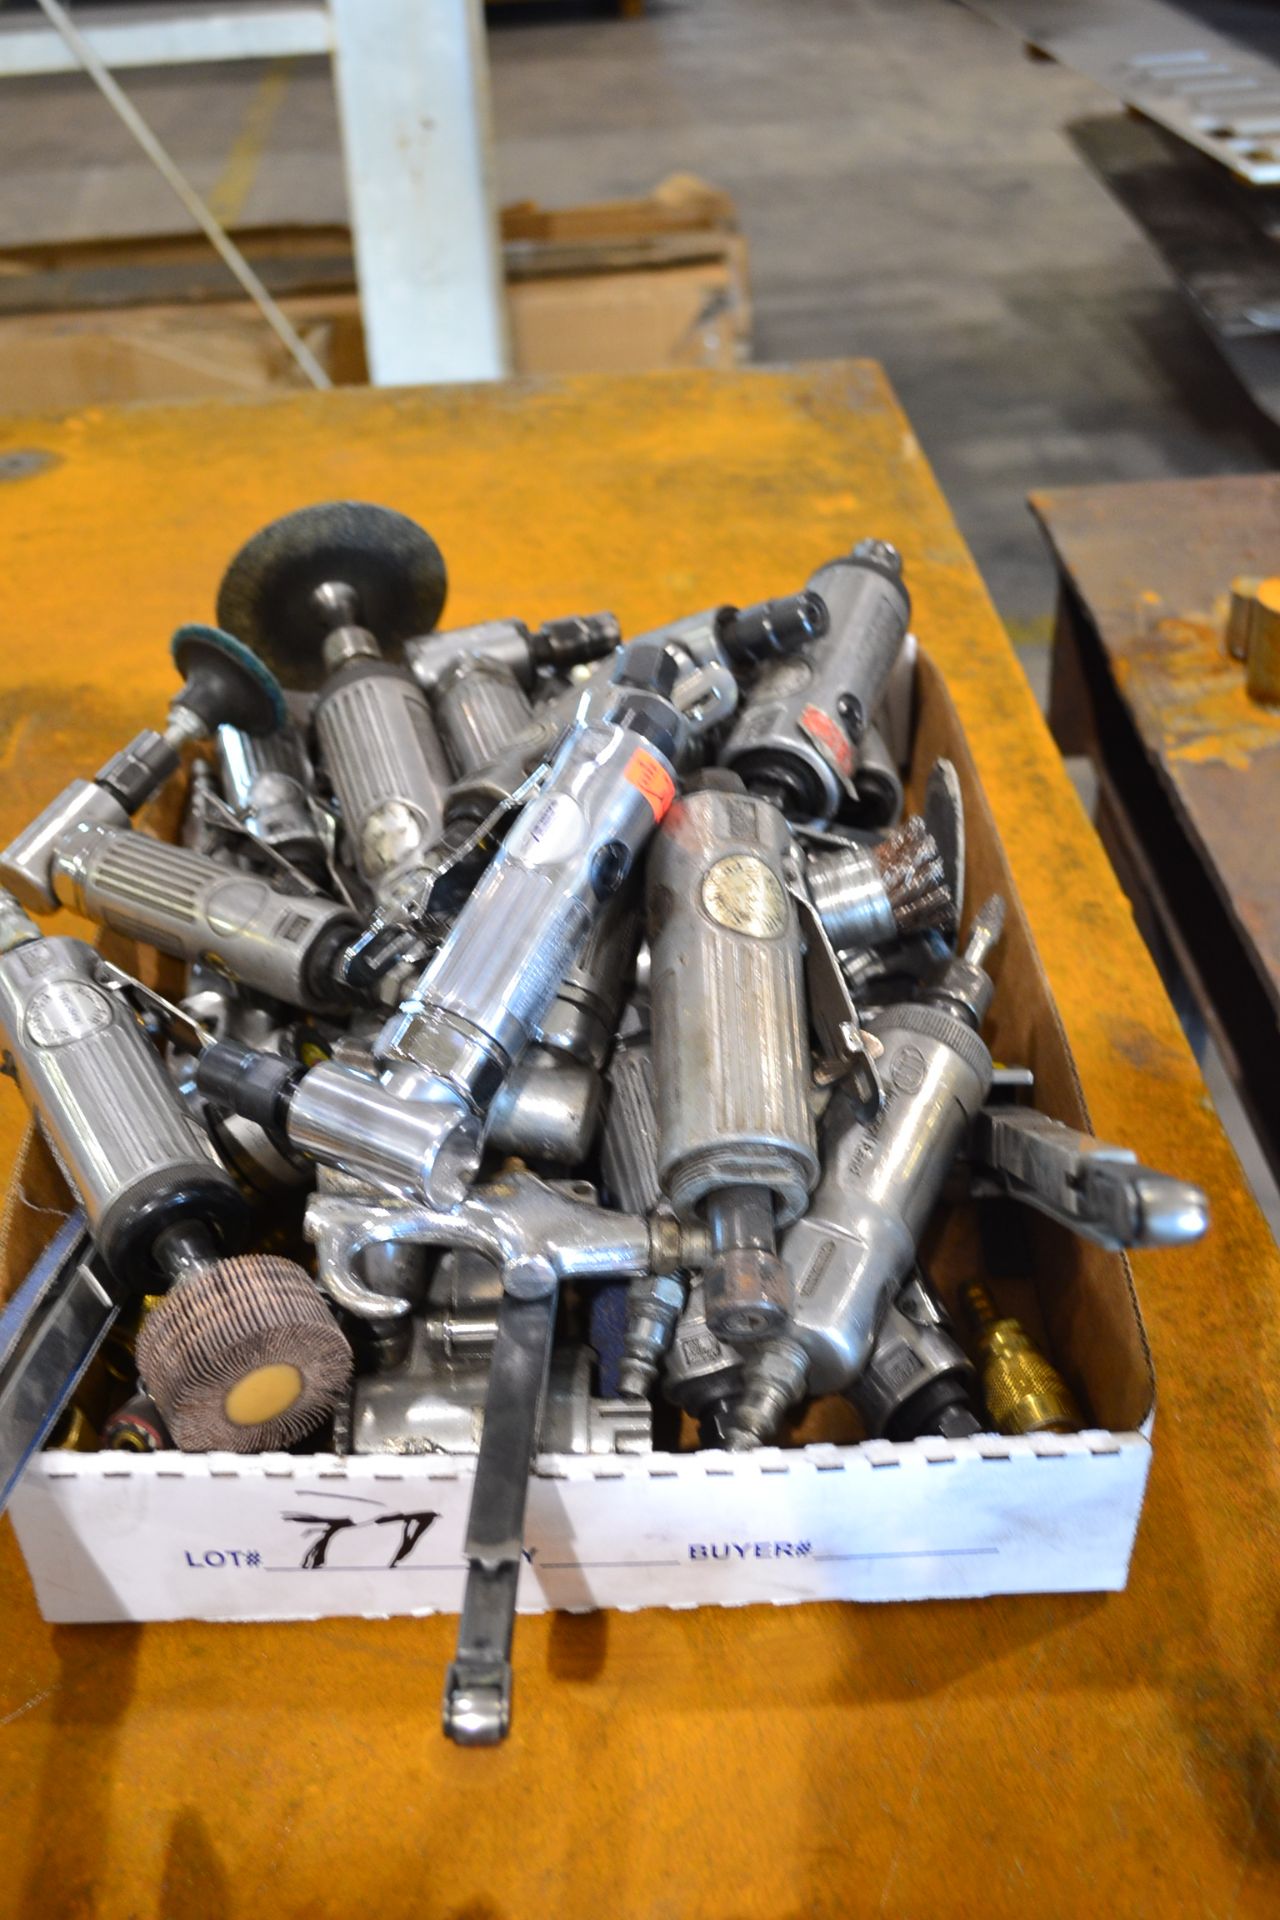 FLAT OF VARIOUS PNEUMATIC TOOLS TO INCLUDE BUT NOT LIMITED TO GRINDERS, AIR GUNS, SANDERS